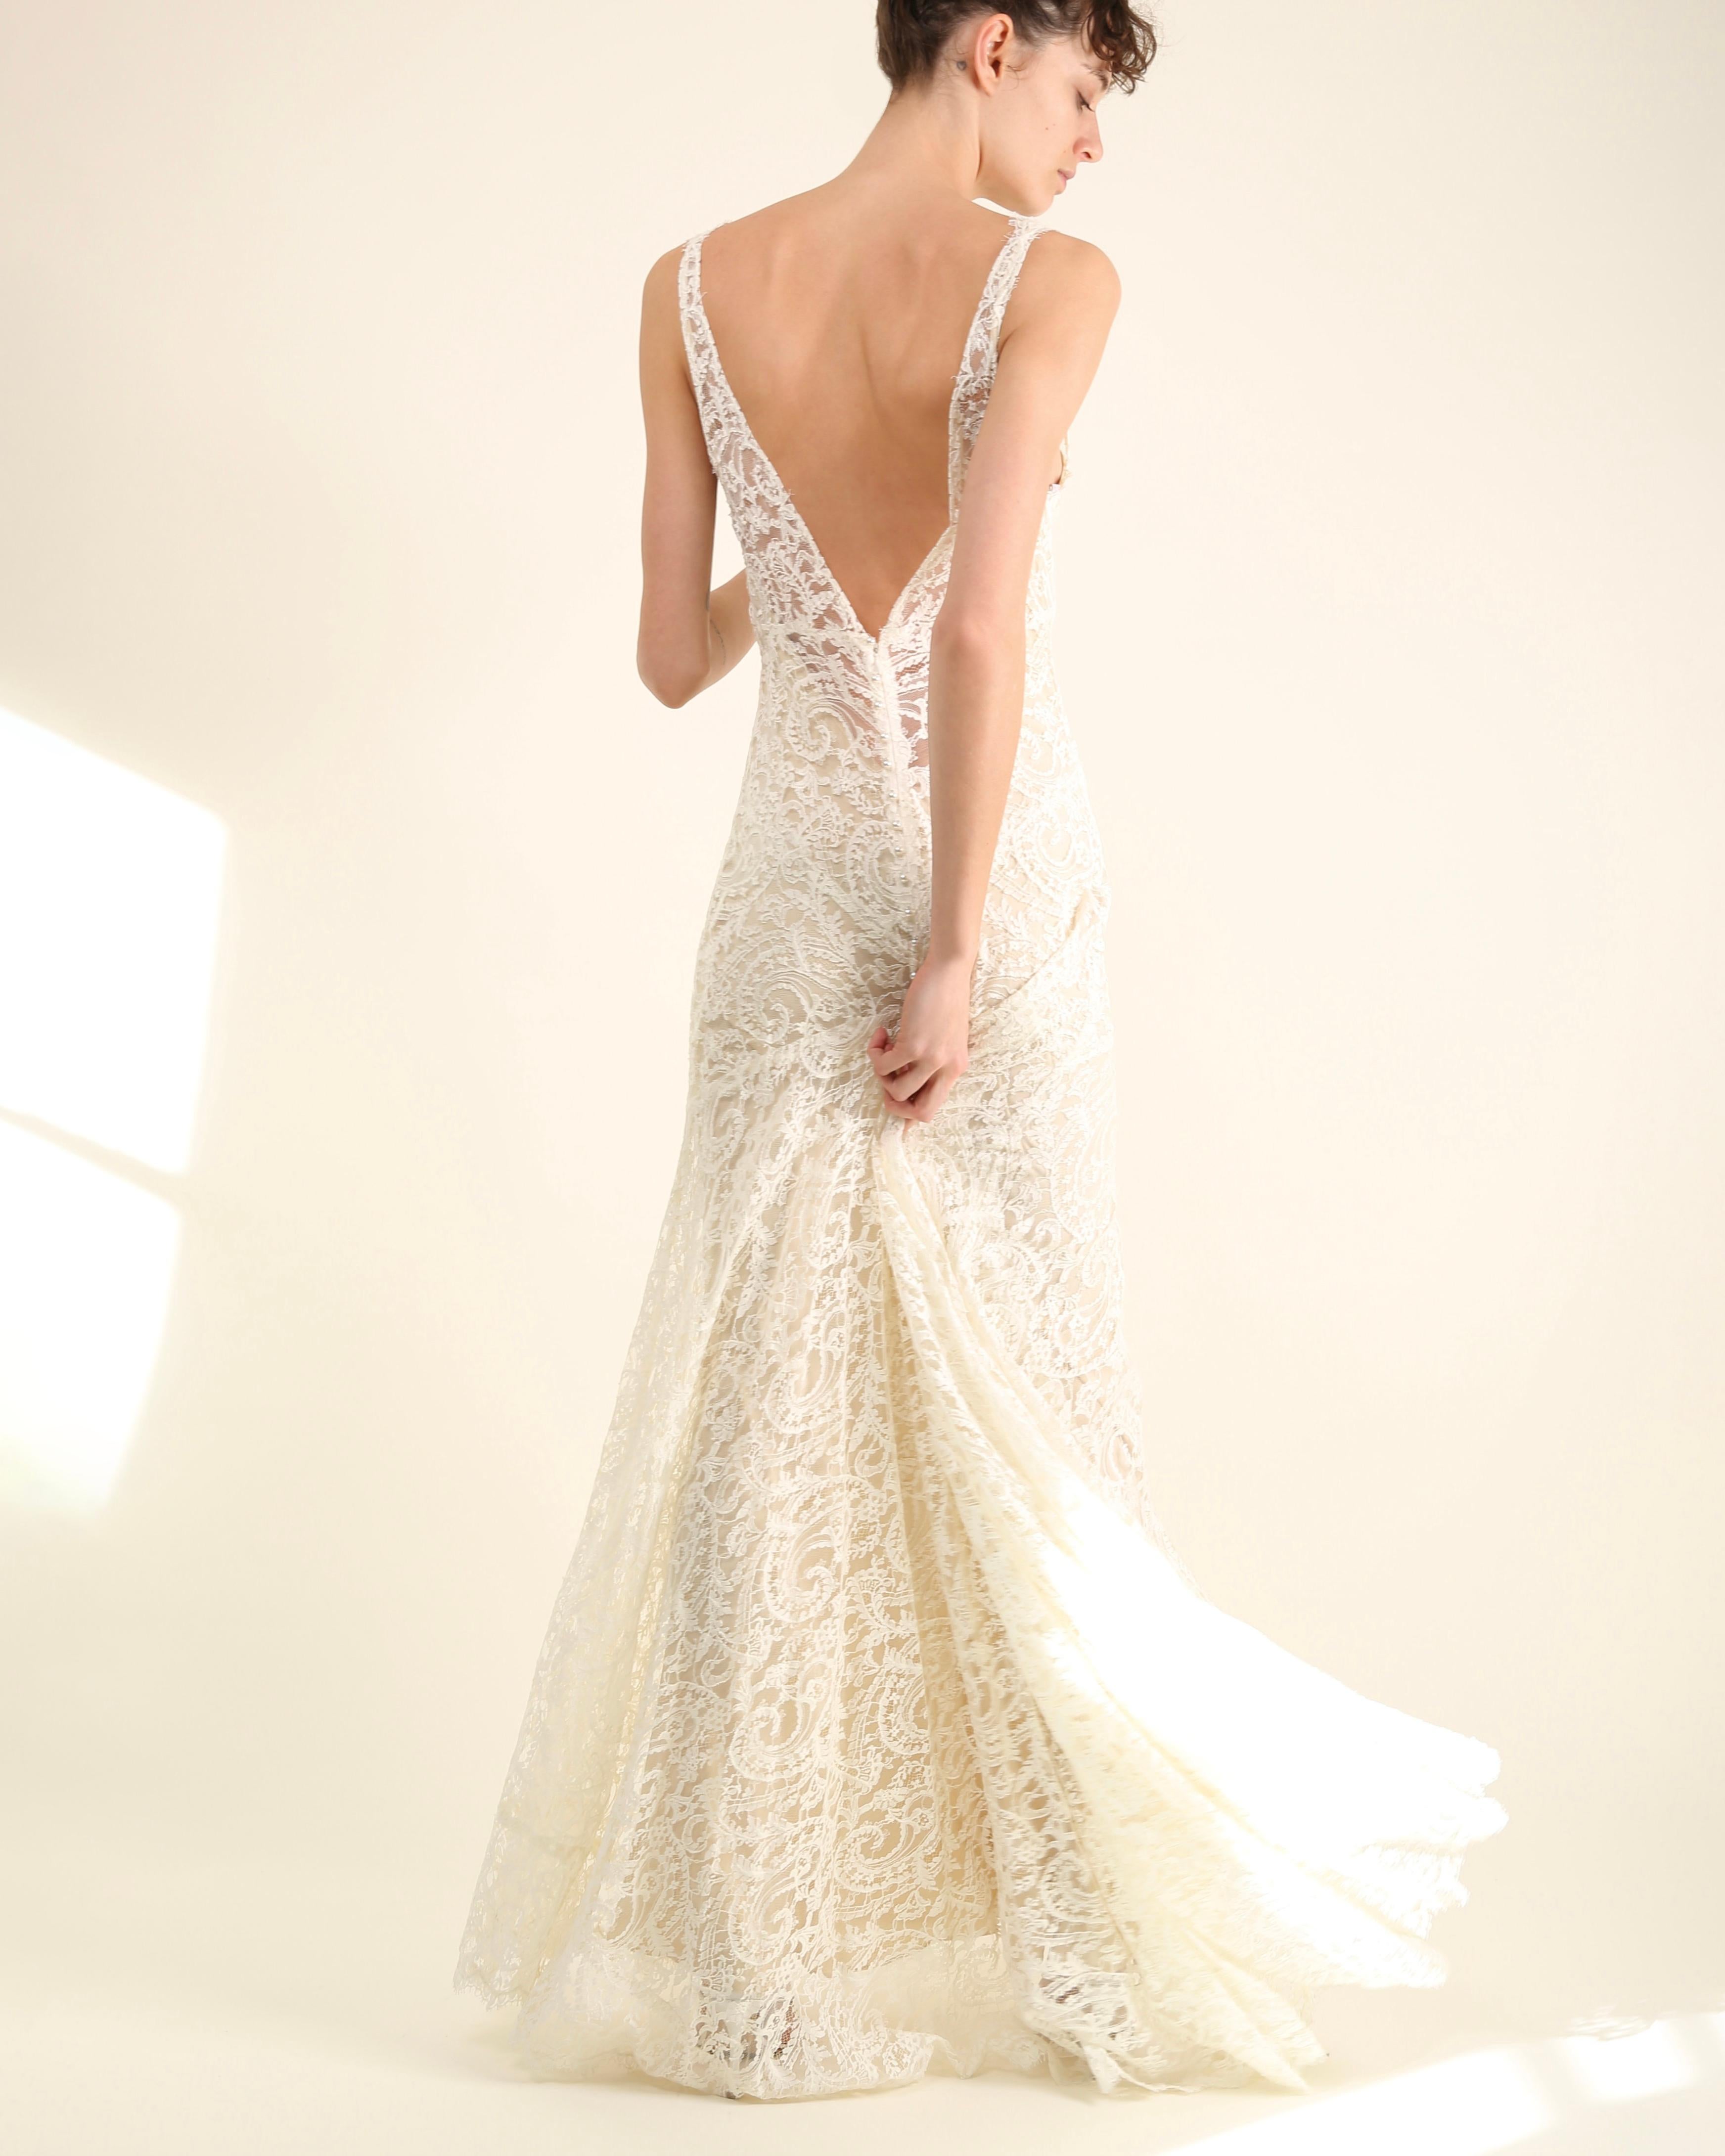 Monique Lhuillier ivory lace plunging backless wedding gown with train dress  1